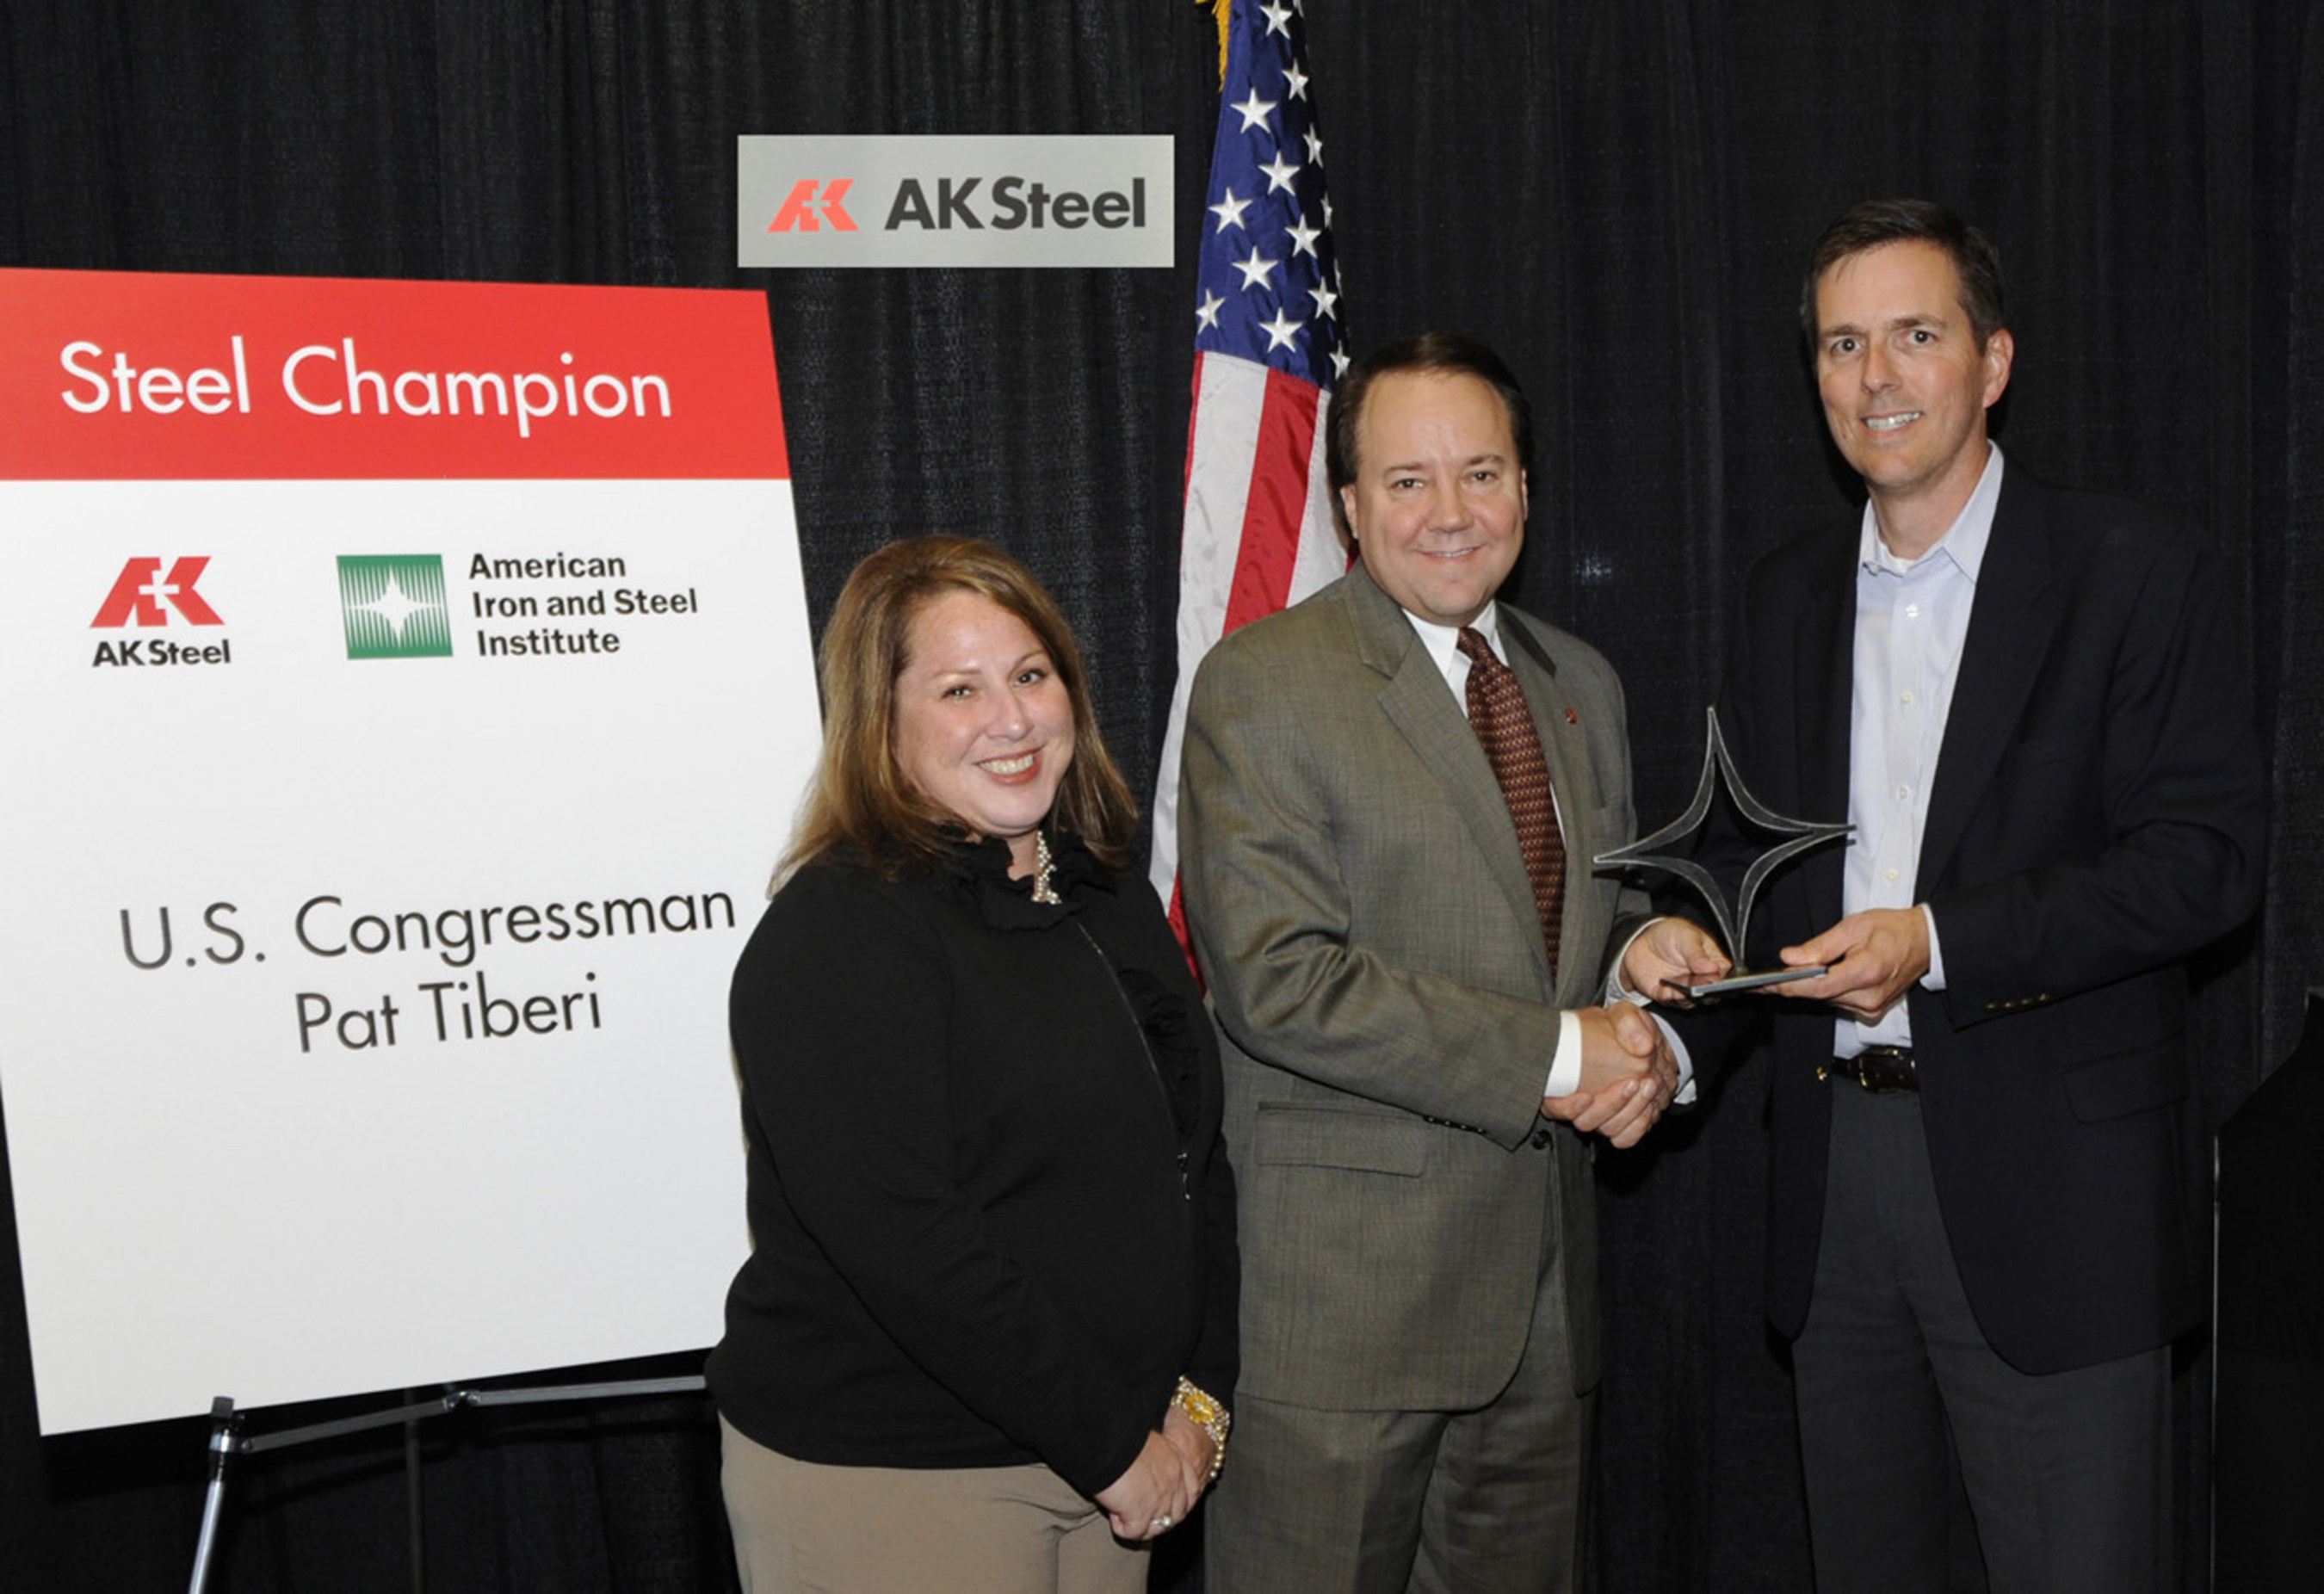 United States Congressman Pat Tiberi of Ohio is presented with a "Steel Champion" Award from the American Iron and Steel Institute (AISI) at AK Steel's Zanesville, Ohio Works. Left to right, Beth DeBrosse, Senior Director, Government Relations, AISI, Congressman Pat Tiberi and Roger Newport, Executive Vice President, Finance and Chief Financial Officer.